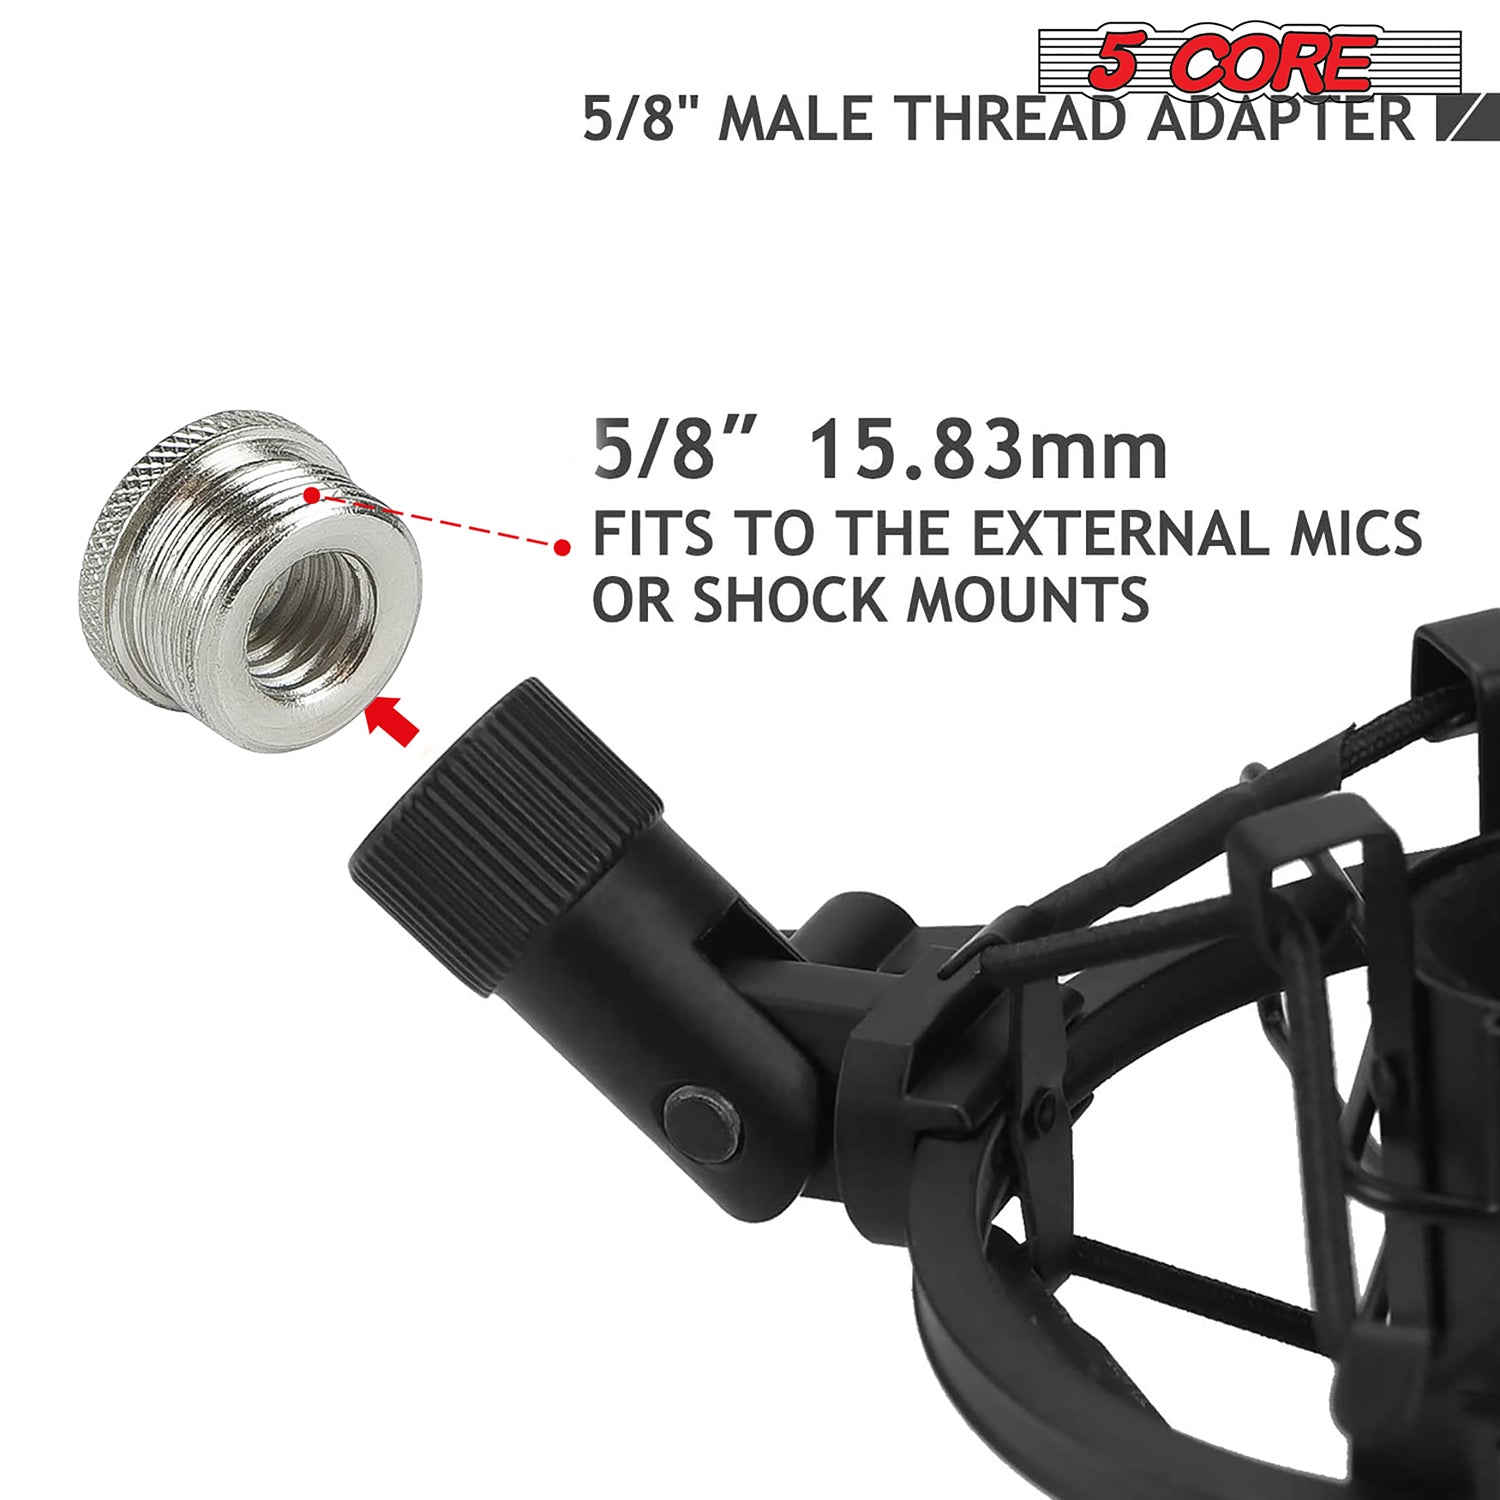 5Core Mic Stand Adapter 5/8 Male to 3/8 Female Screw Adapter w Knurled Surface Adopter 2/4/12 Pc